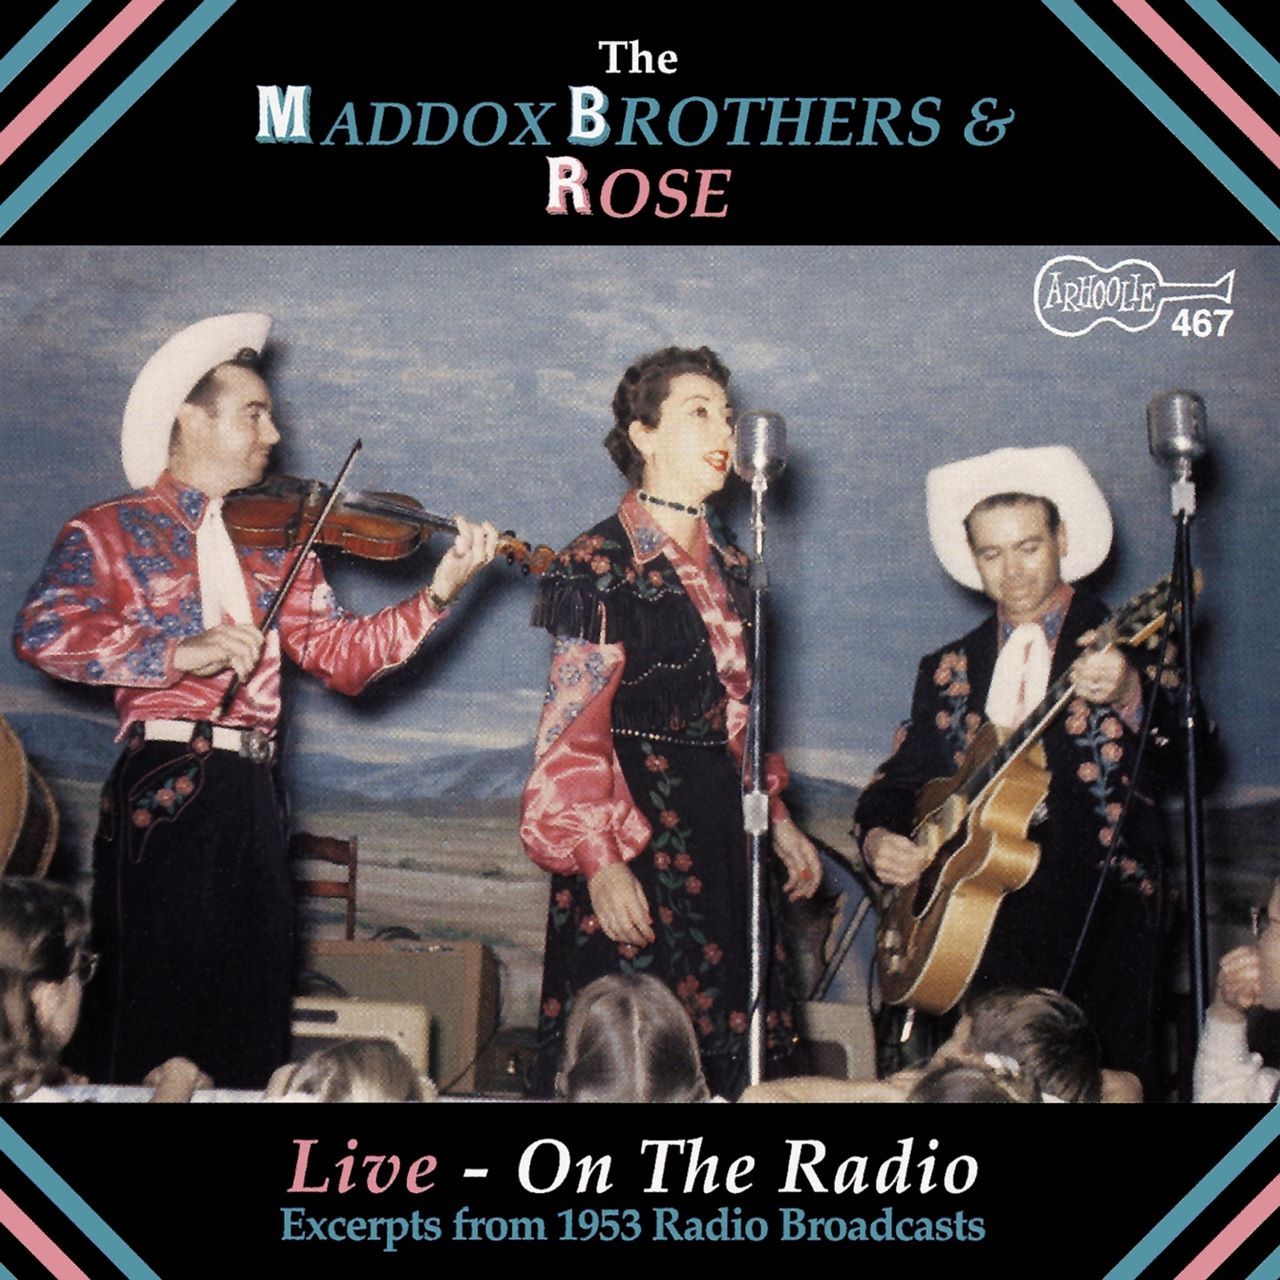 Maddox Brothers & Rose - Live - On The Radio cover album